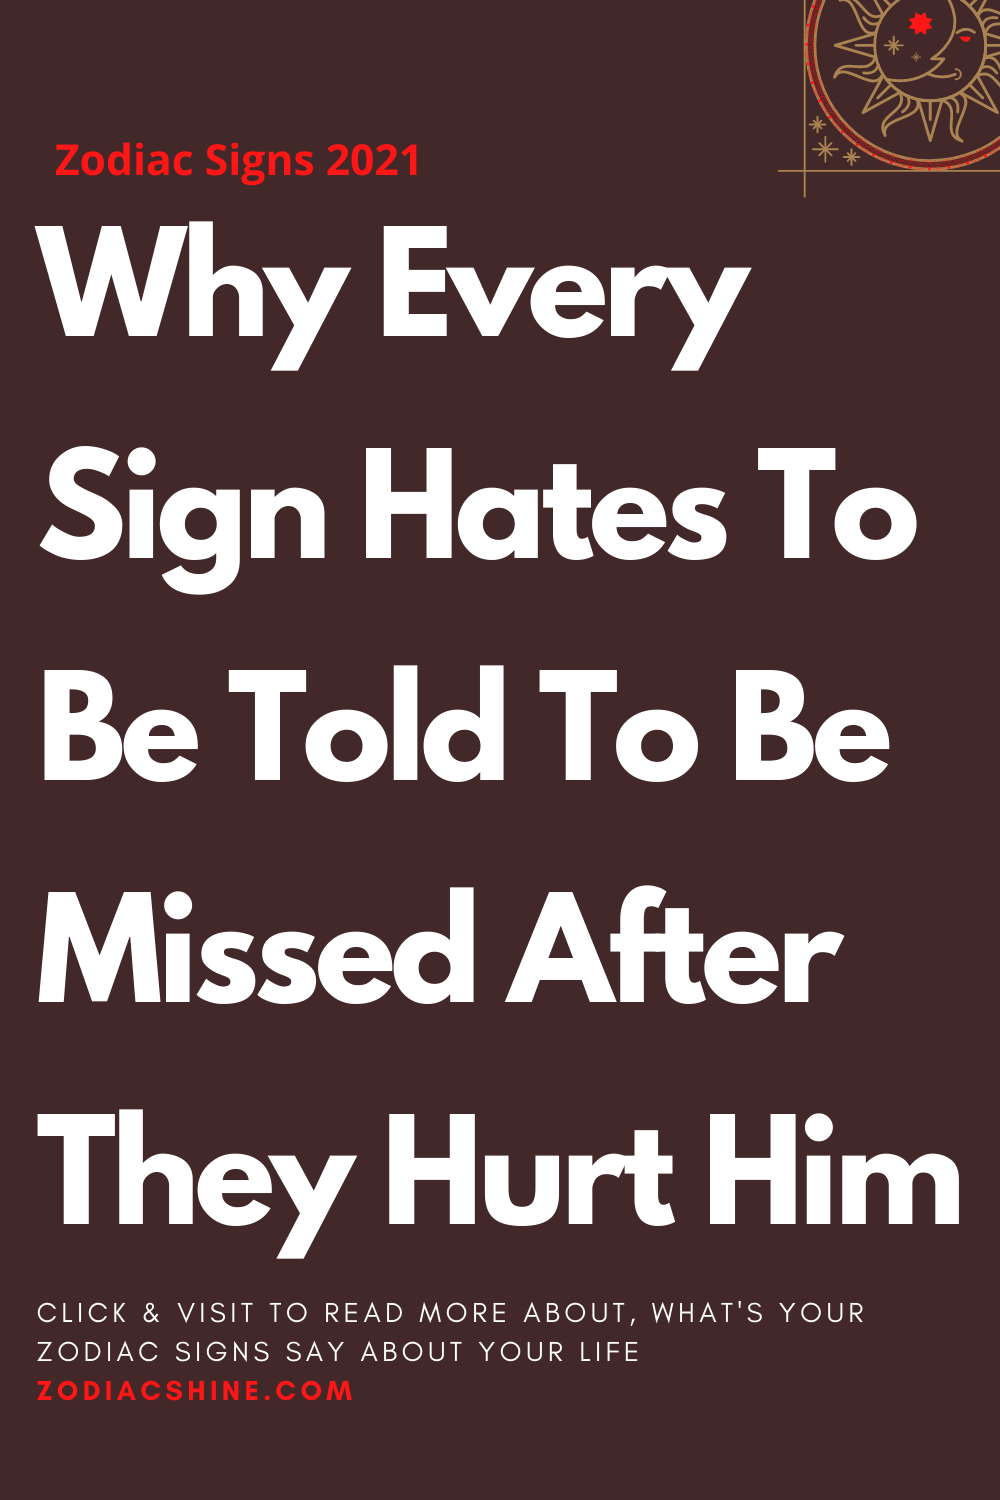 Why Every Sign Hates To Be Told To Be Missed After They Hurt Him